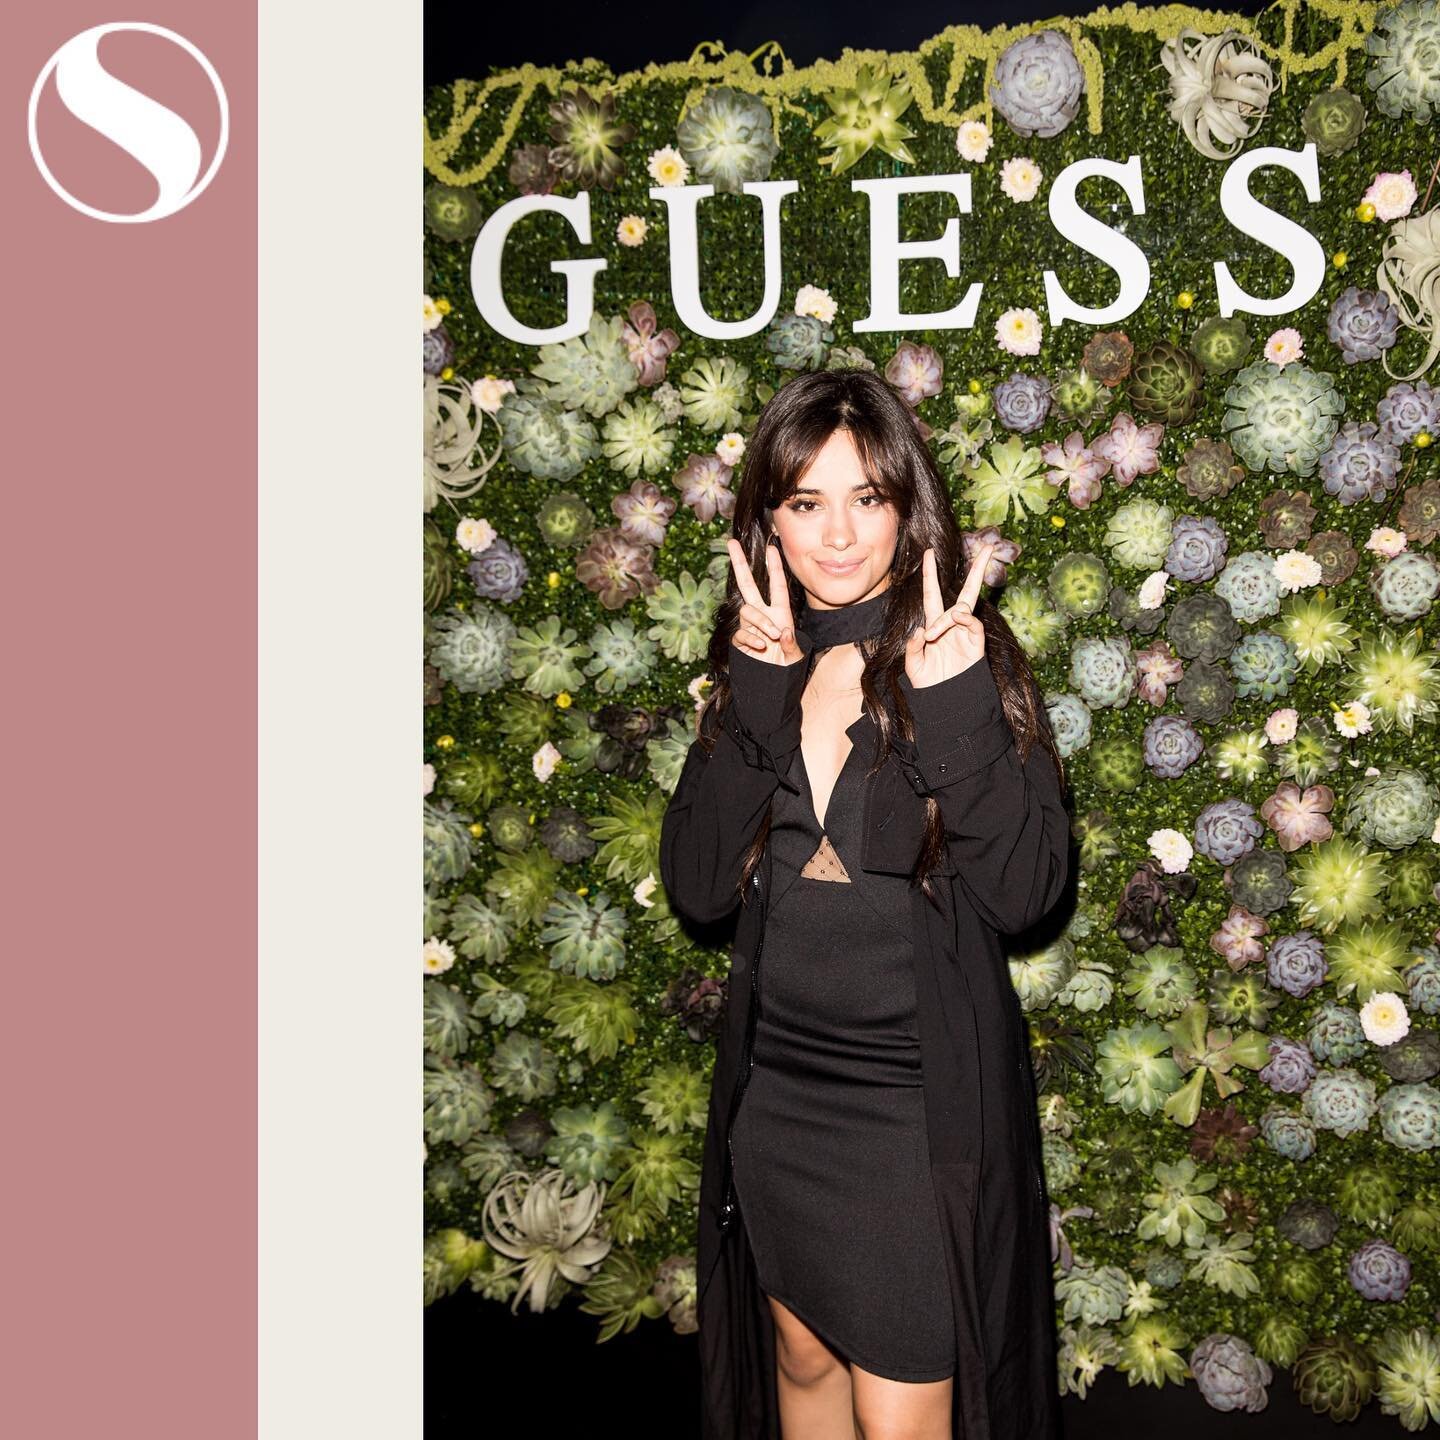 It&rsquo;s officially New York Fashion Week, and tho we will miss the street style, we&rsquo;ll be keeping up with the runway virtually this year. Here is a highlight of one of our favorite NYFW events with @GUESS that launched @camila_cabello&rsquo;